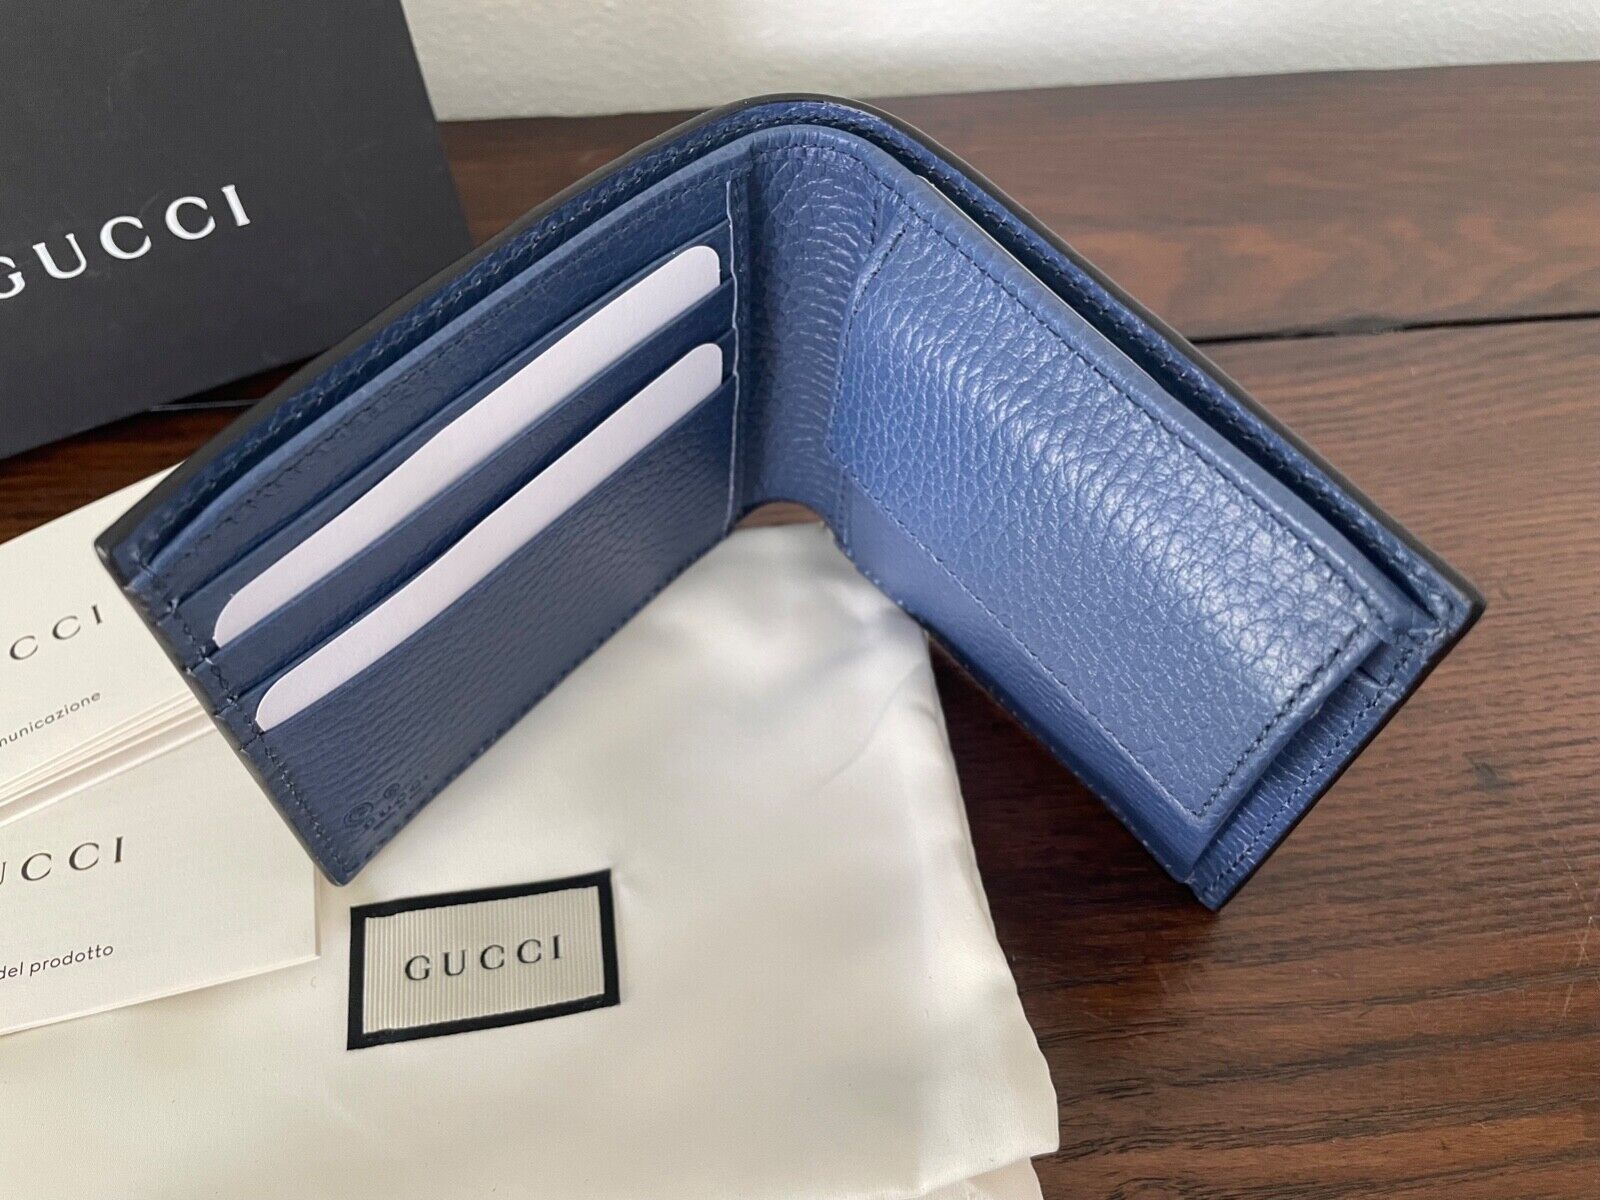 Gucci Wallets & Cardholders for Men - Leather & Luxury - prices in dubai | FASHIOLA UAE